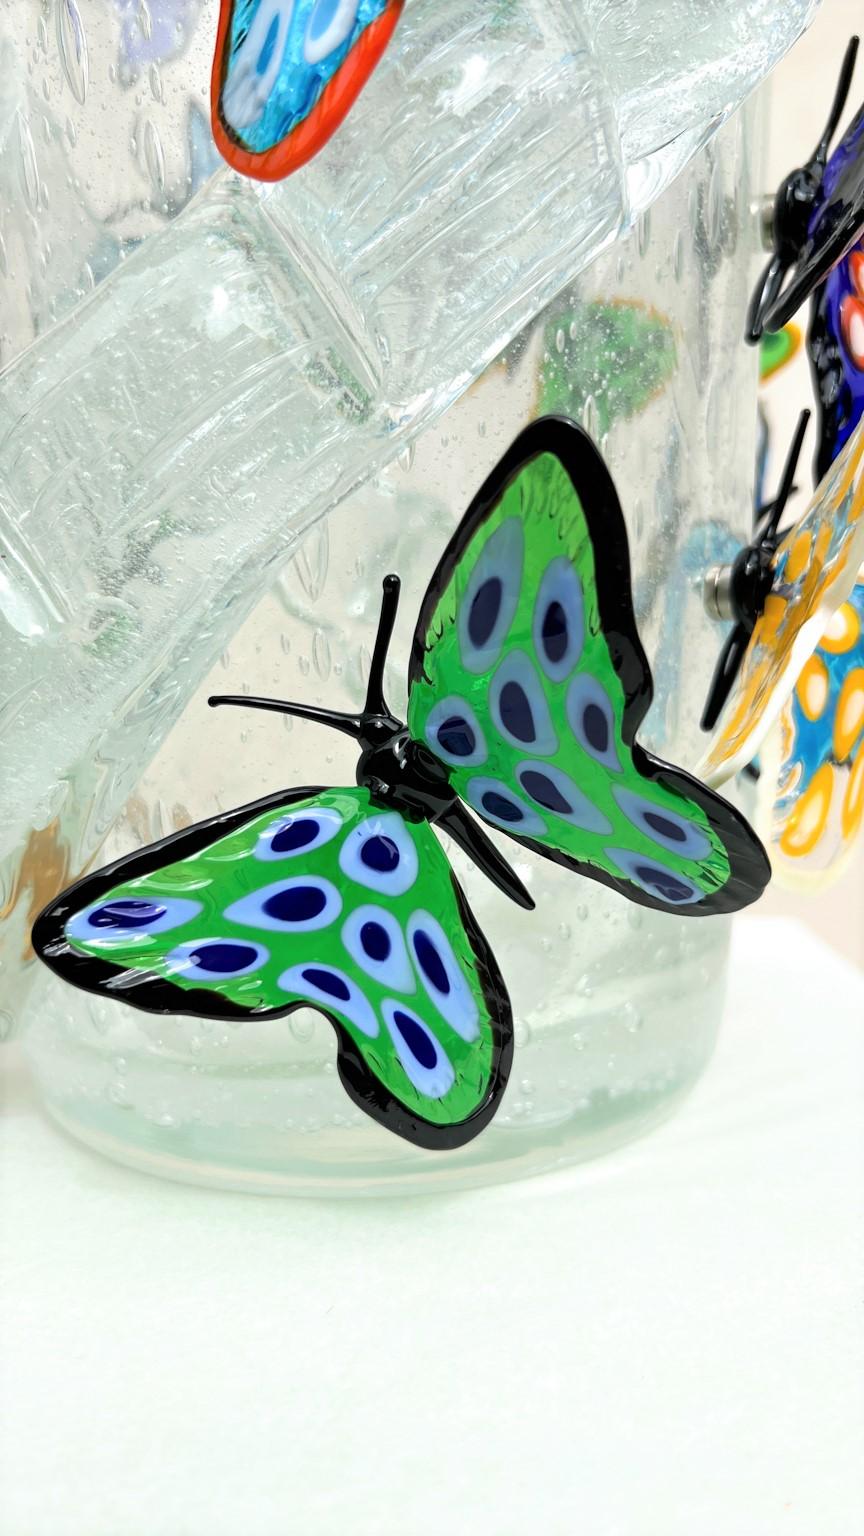 Italian Costantini Diego Modern Crystal Pulegoso Made Murano Glass Vase with Butterflies For Sale